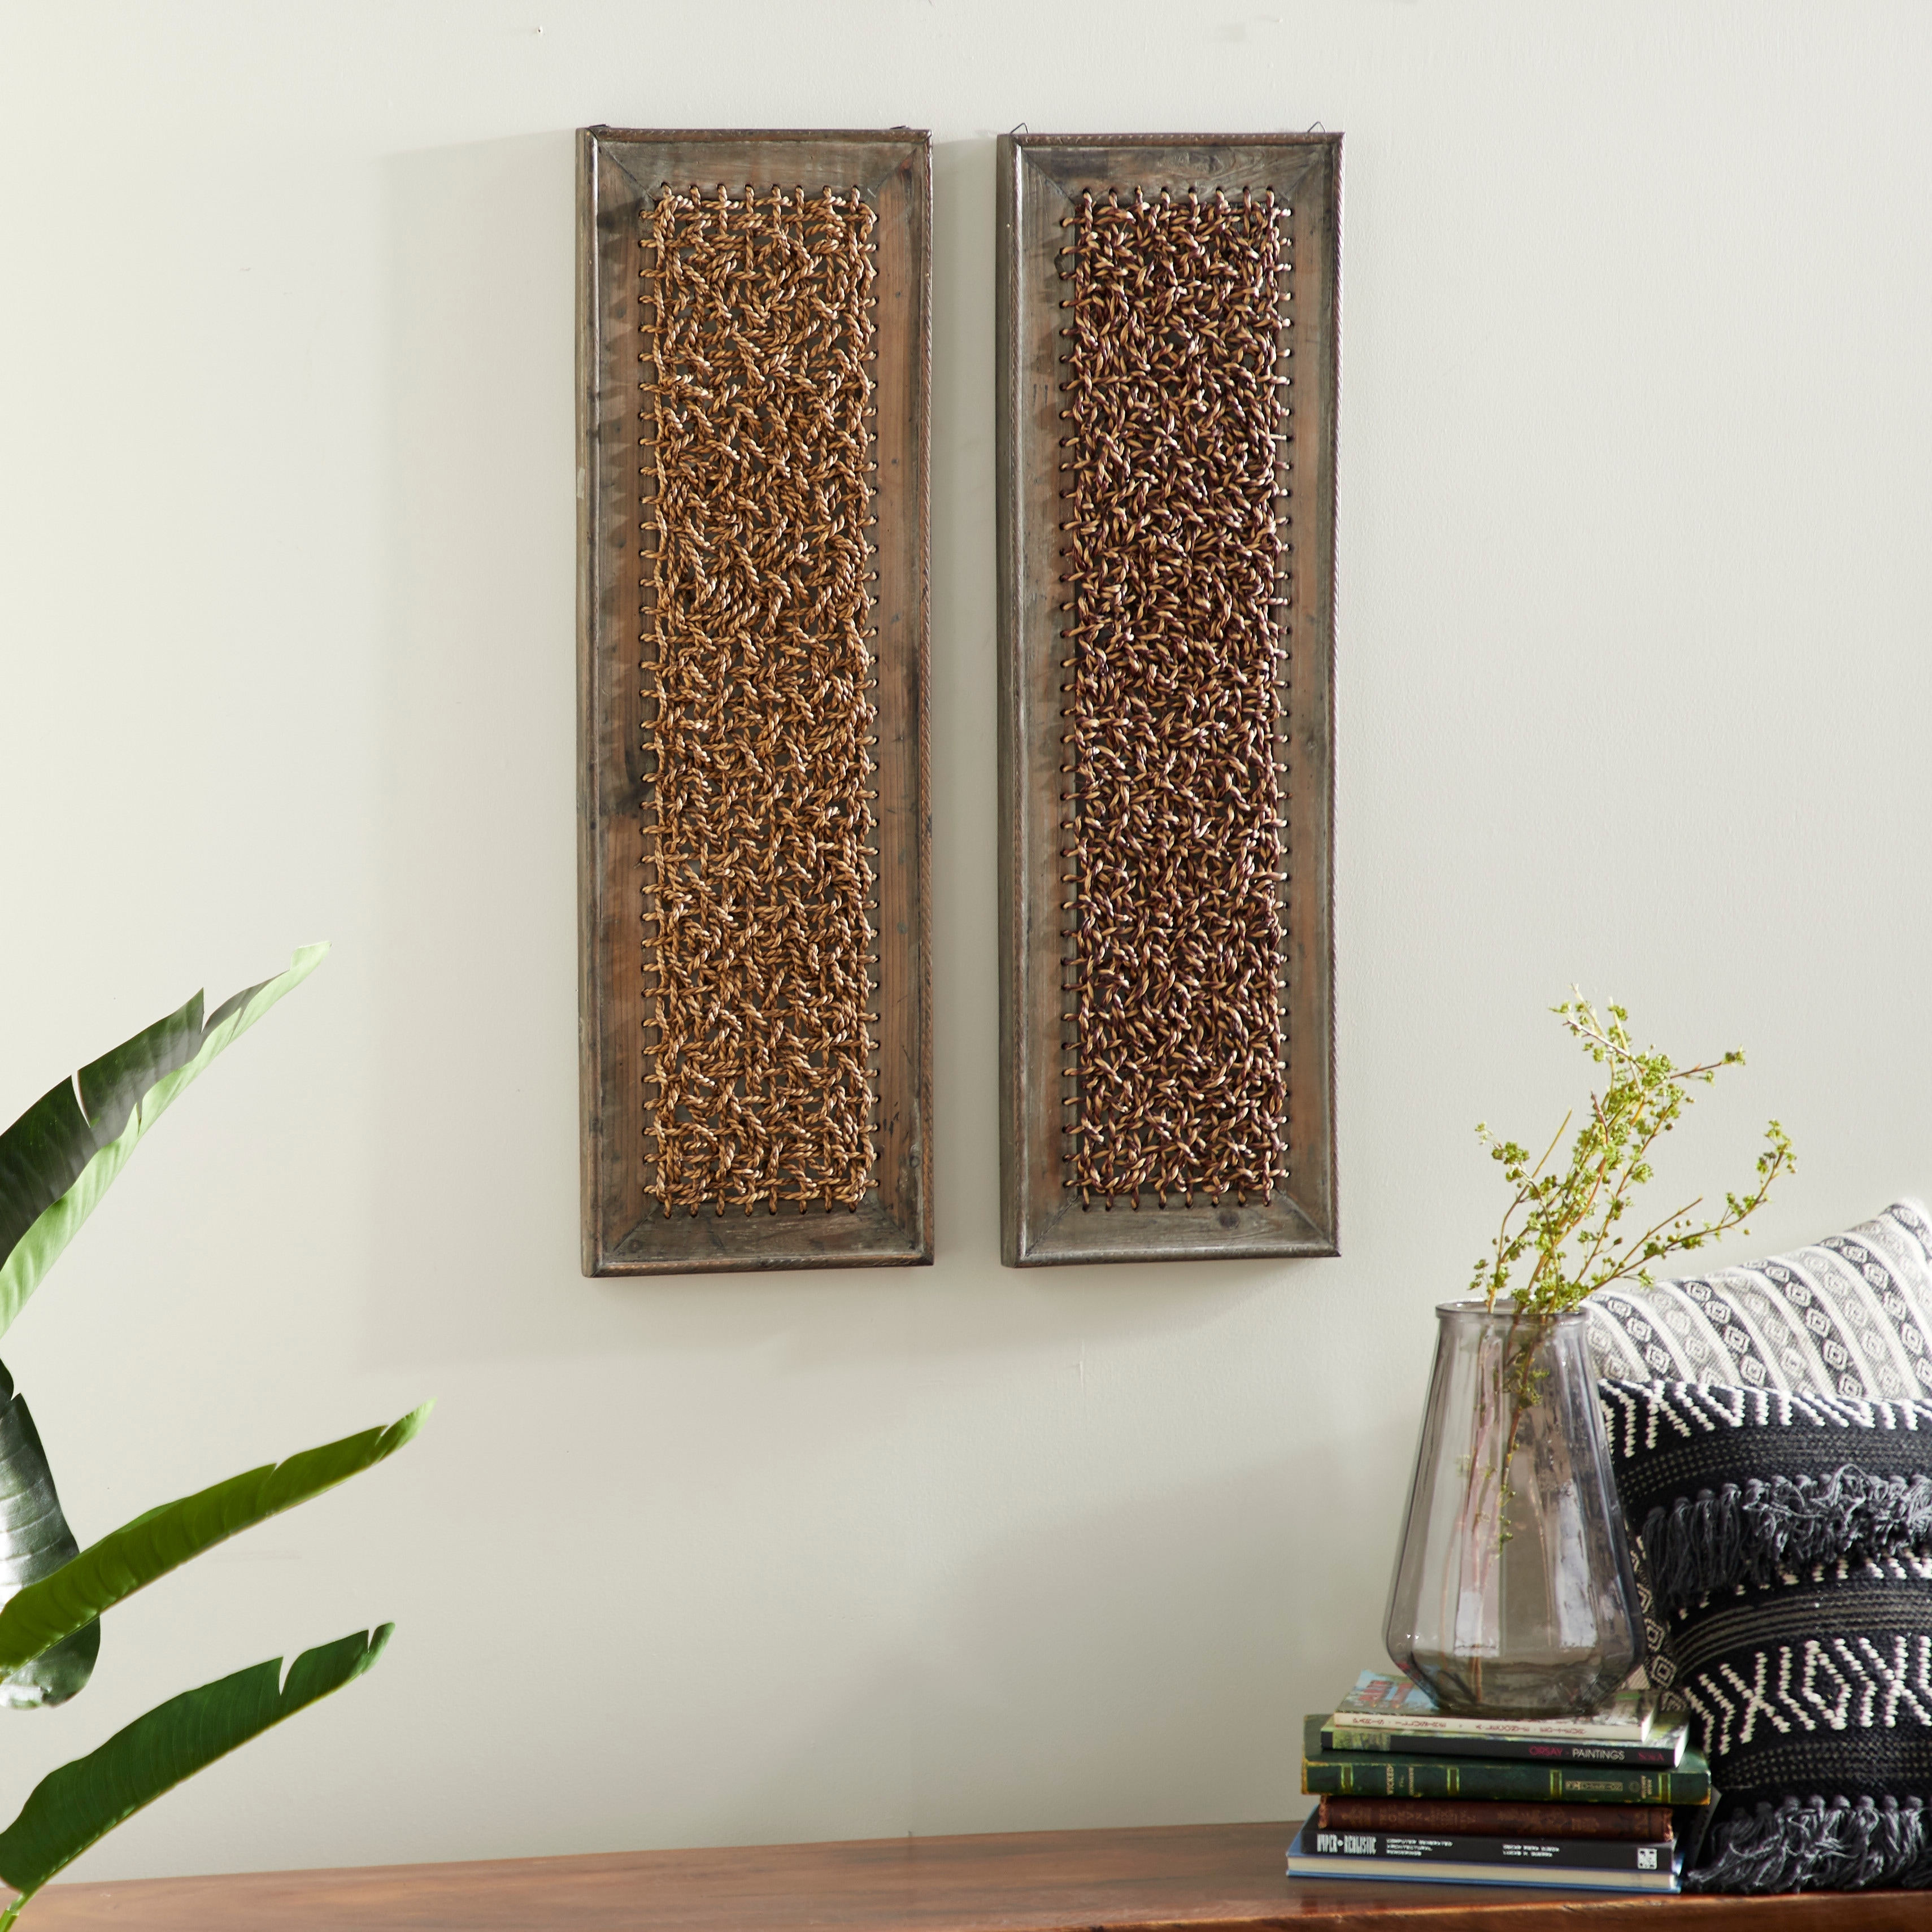 Brown Wooden Woven Seagrass Abstract Wall Decor (Set of 2) On Sale Bed  Bath  Beyond 11837541